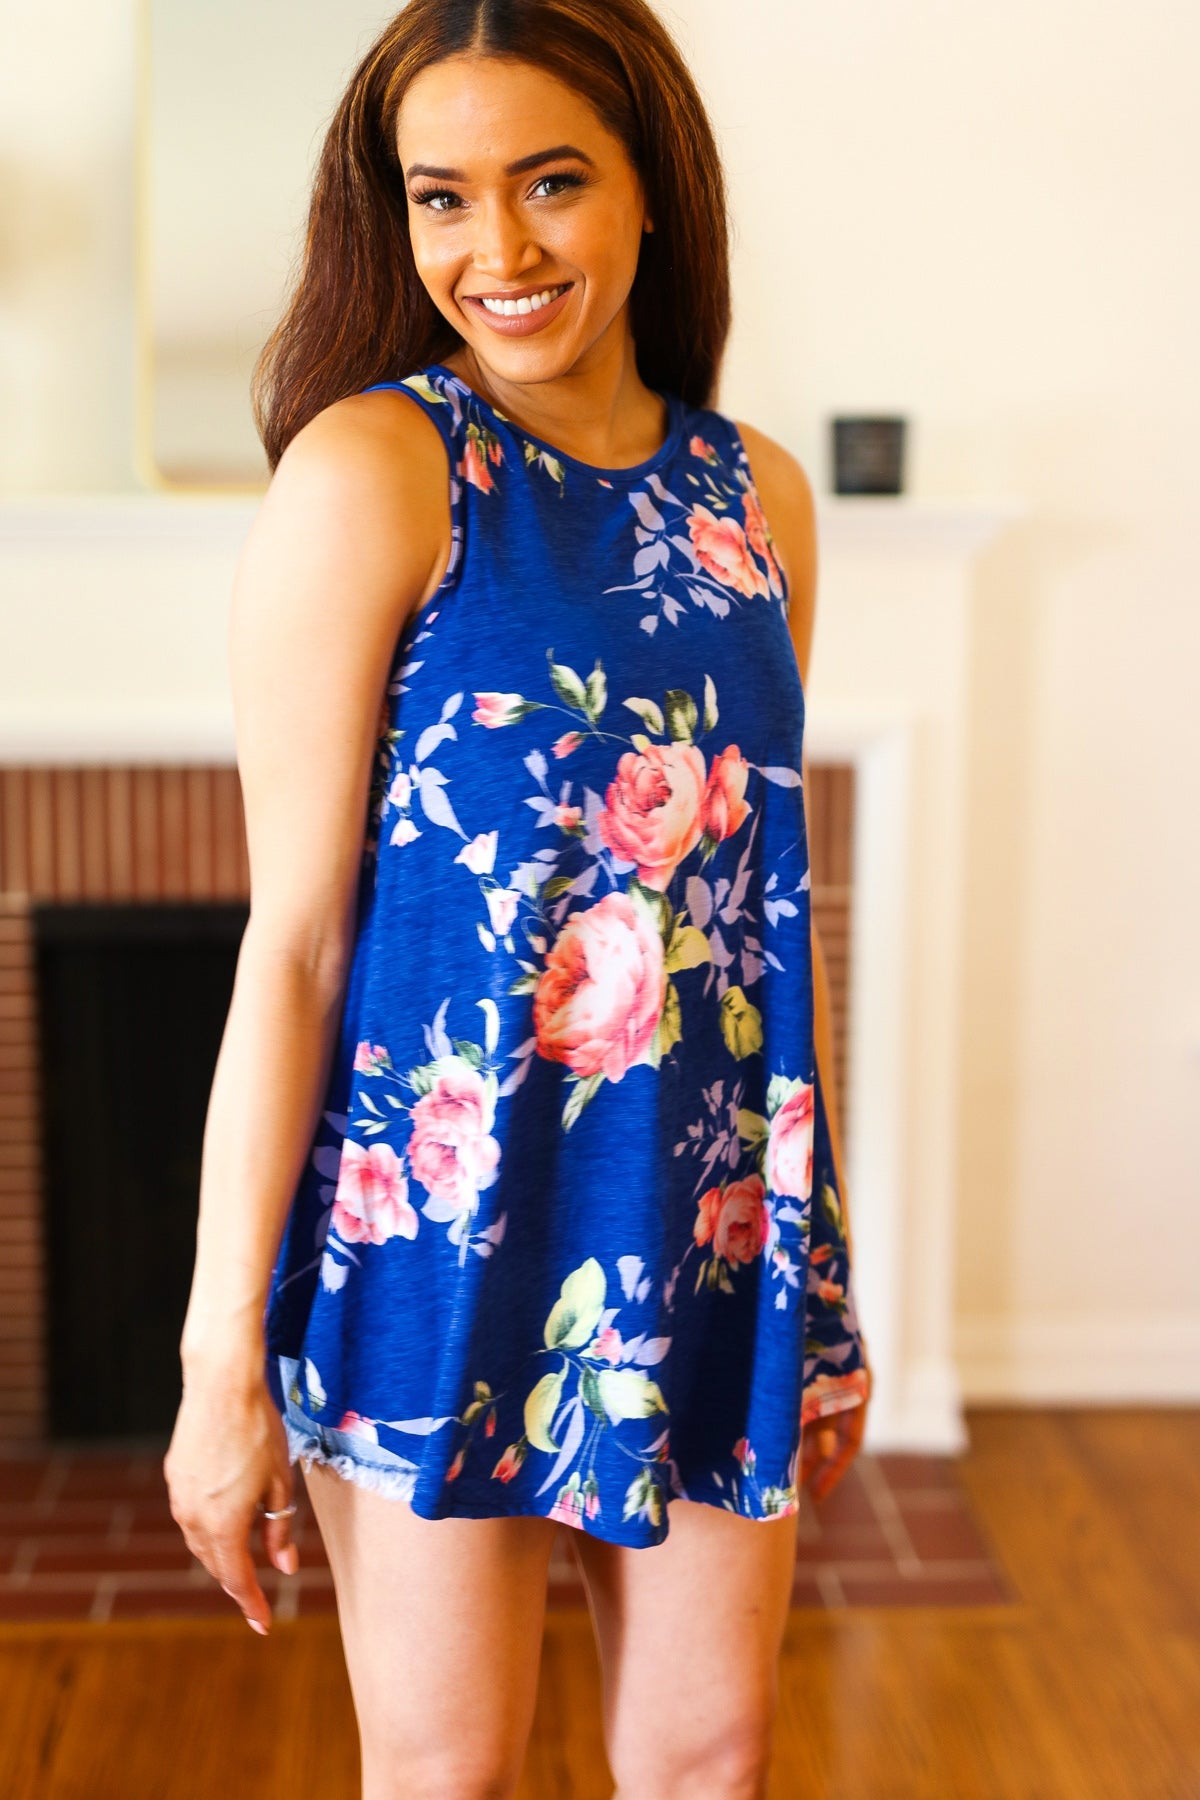 Sunny Days Navy Blue Floral Print Sleeveless Top Beeson River